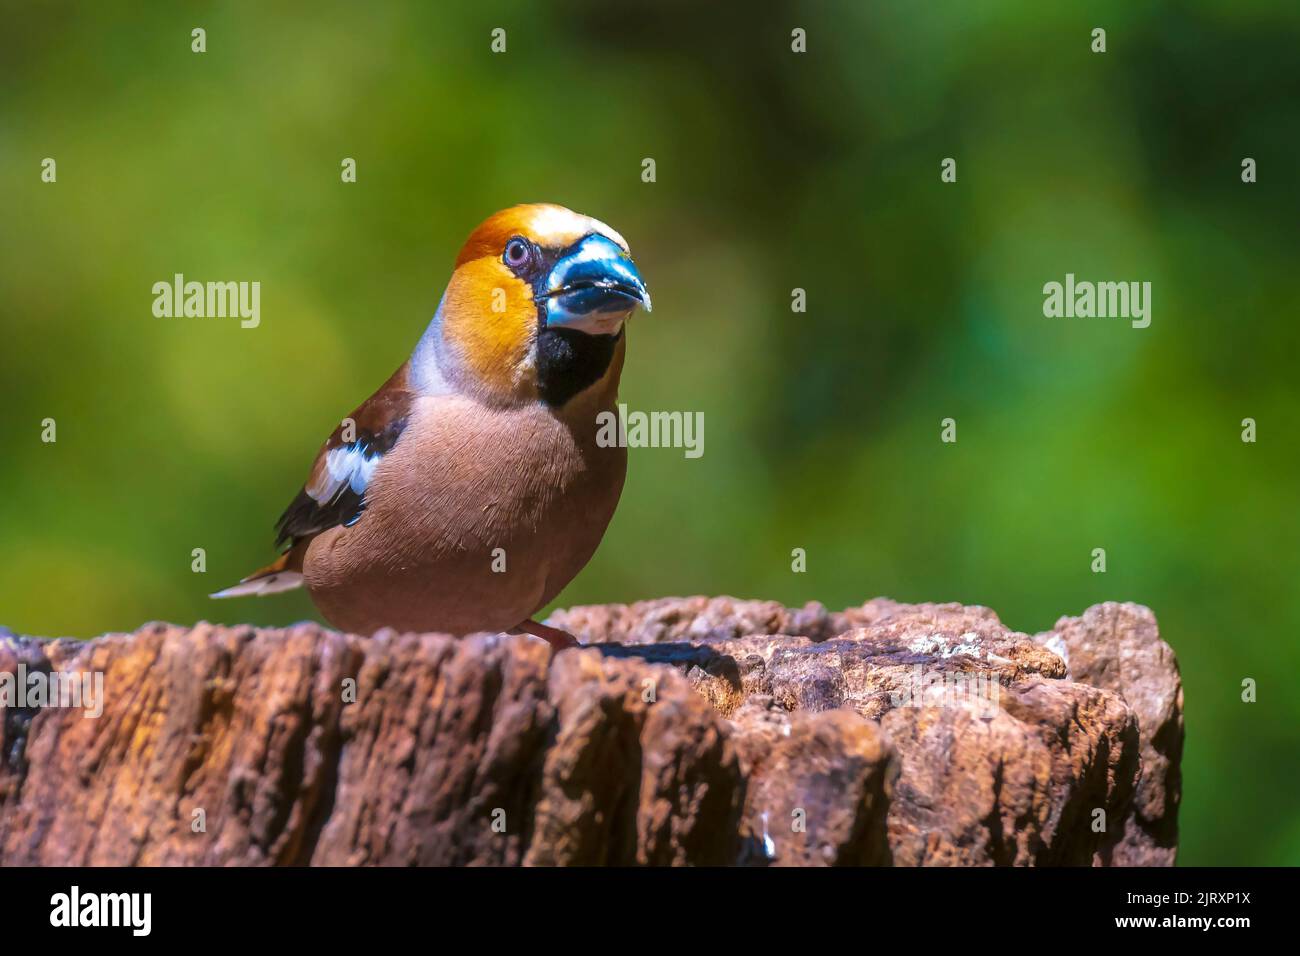 Closeup of a male hawfinch Coccothraustes coccothraustes bird perched in a forest. Selective focus and natural sunlight Stock Photo